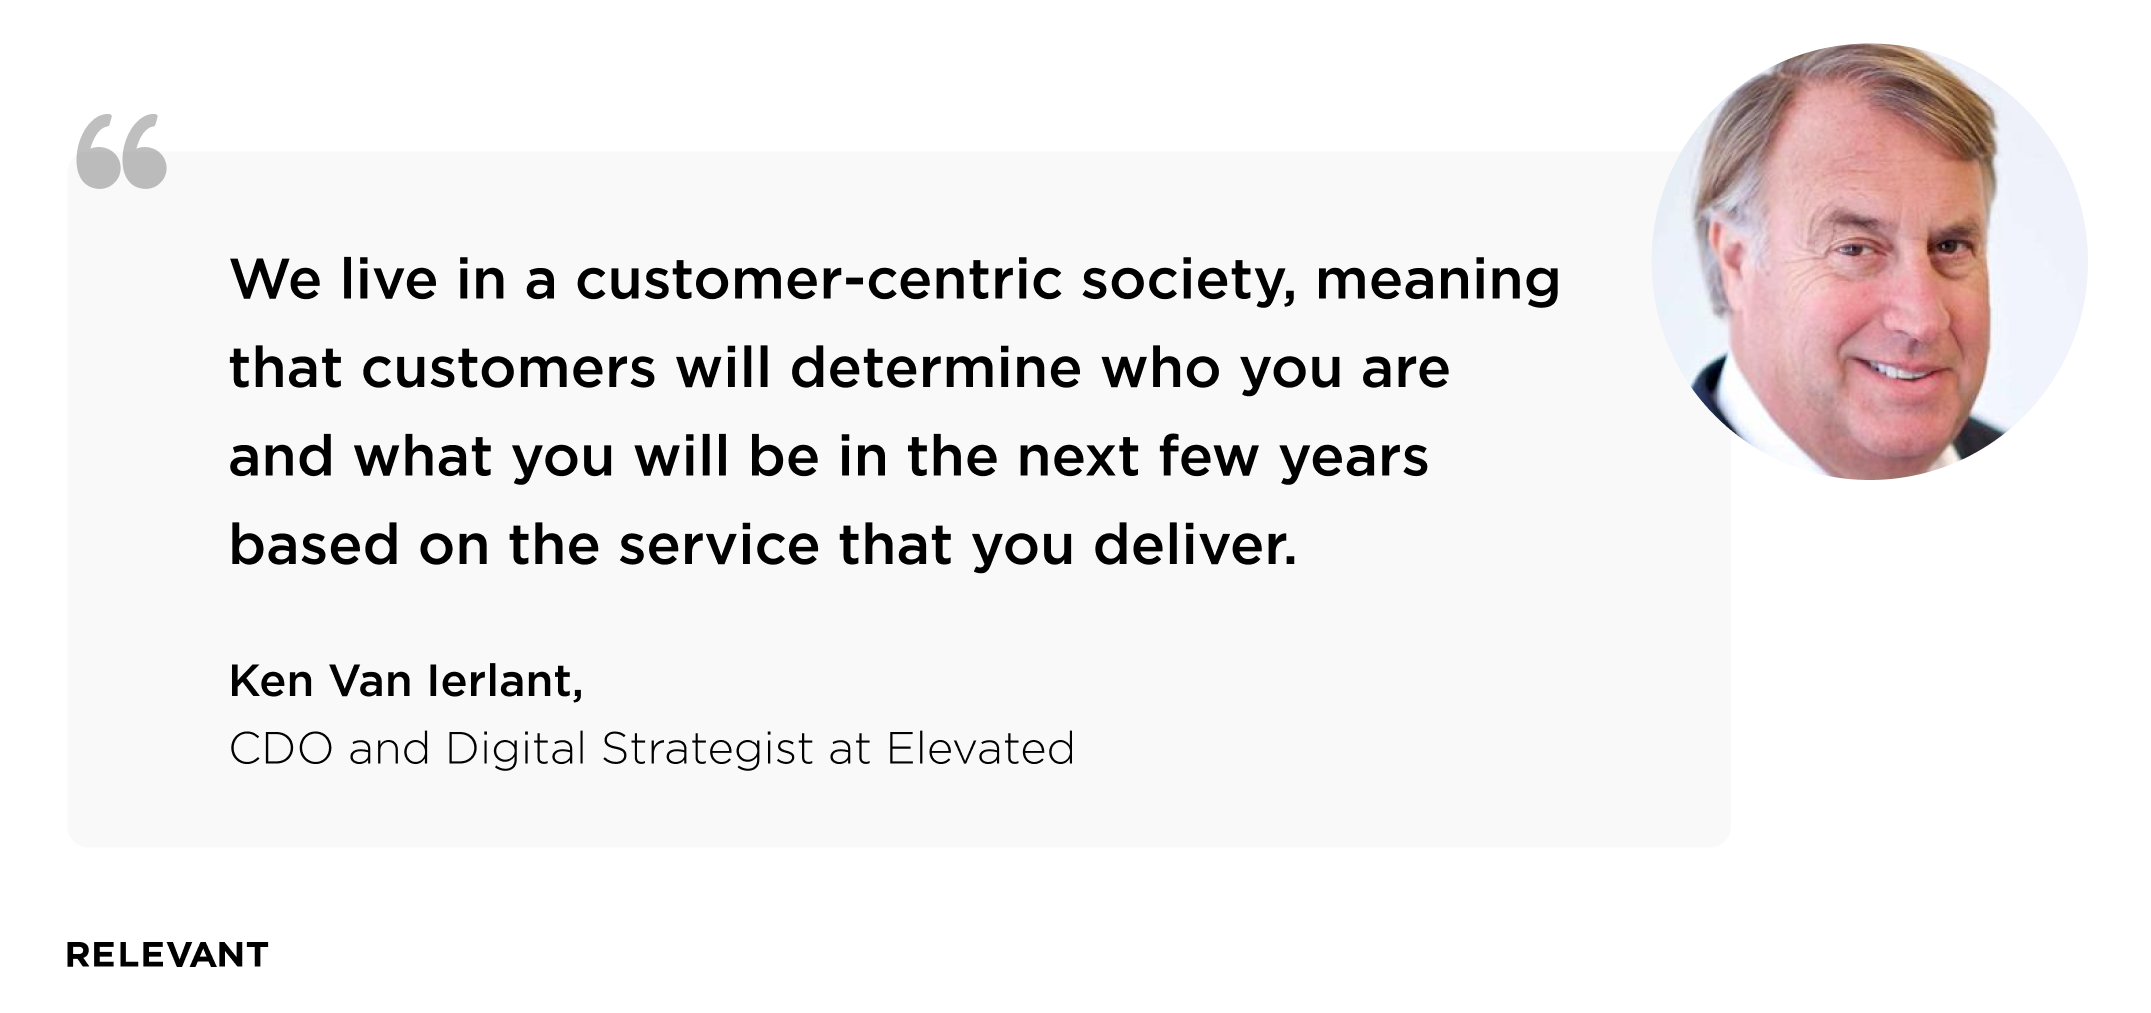 Ken Van Ierlant “The digital economy is, and will always be, customer-driven.”